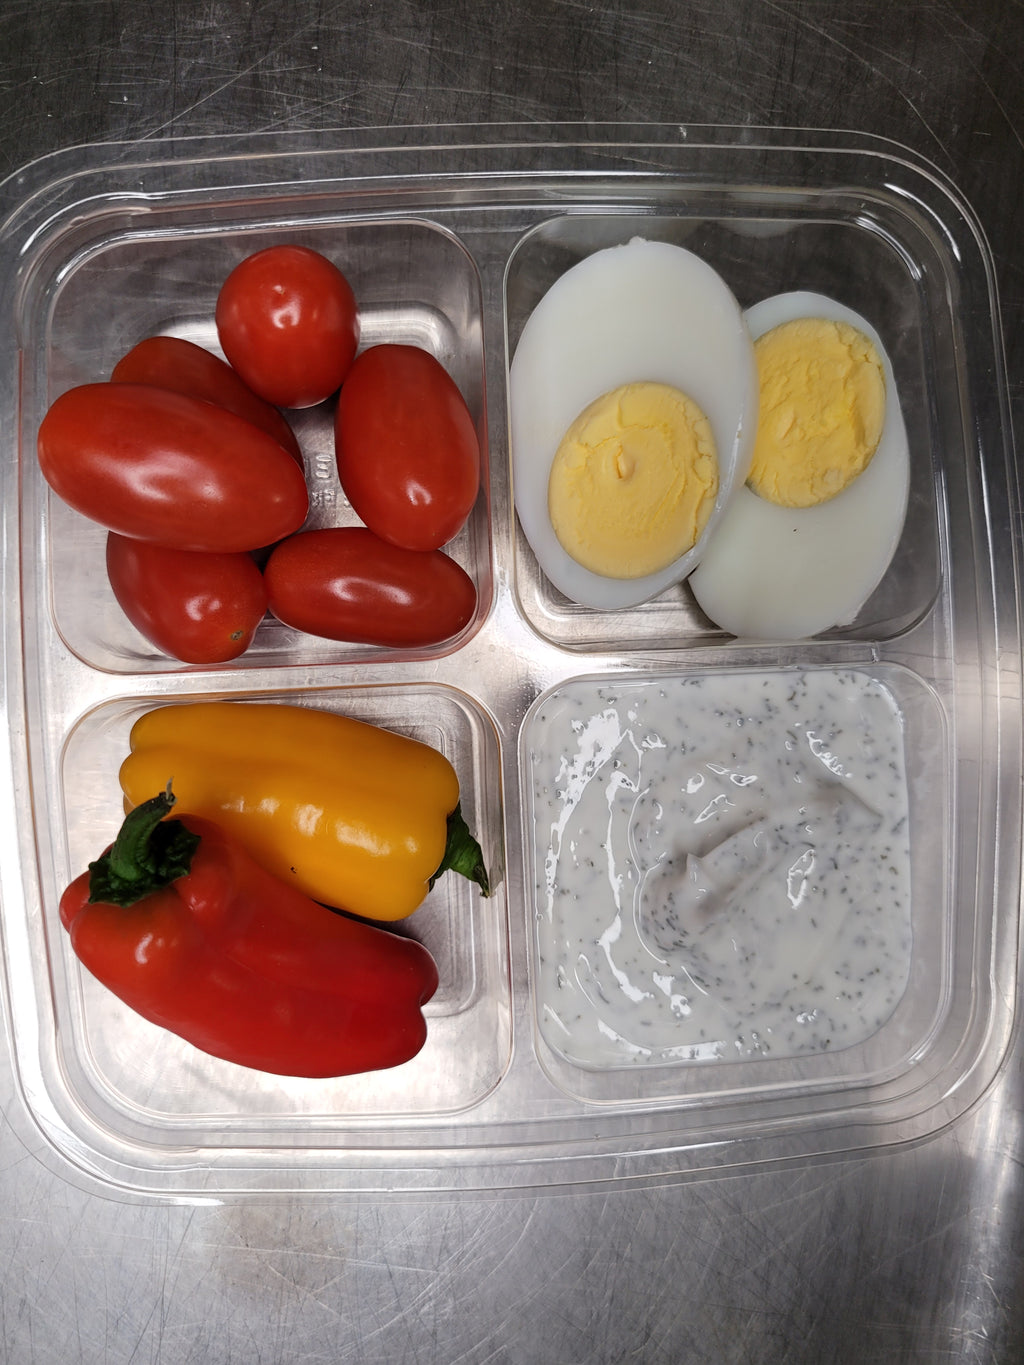 hard boiled egg, cherry tomatoes, peppers and dip  best meal delivery